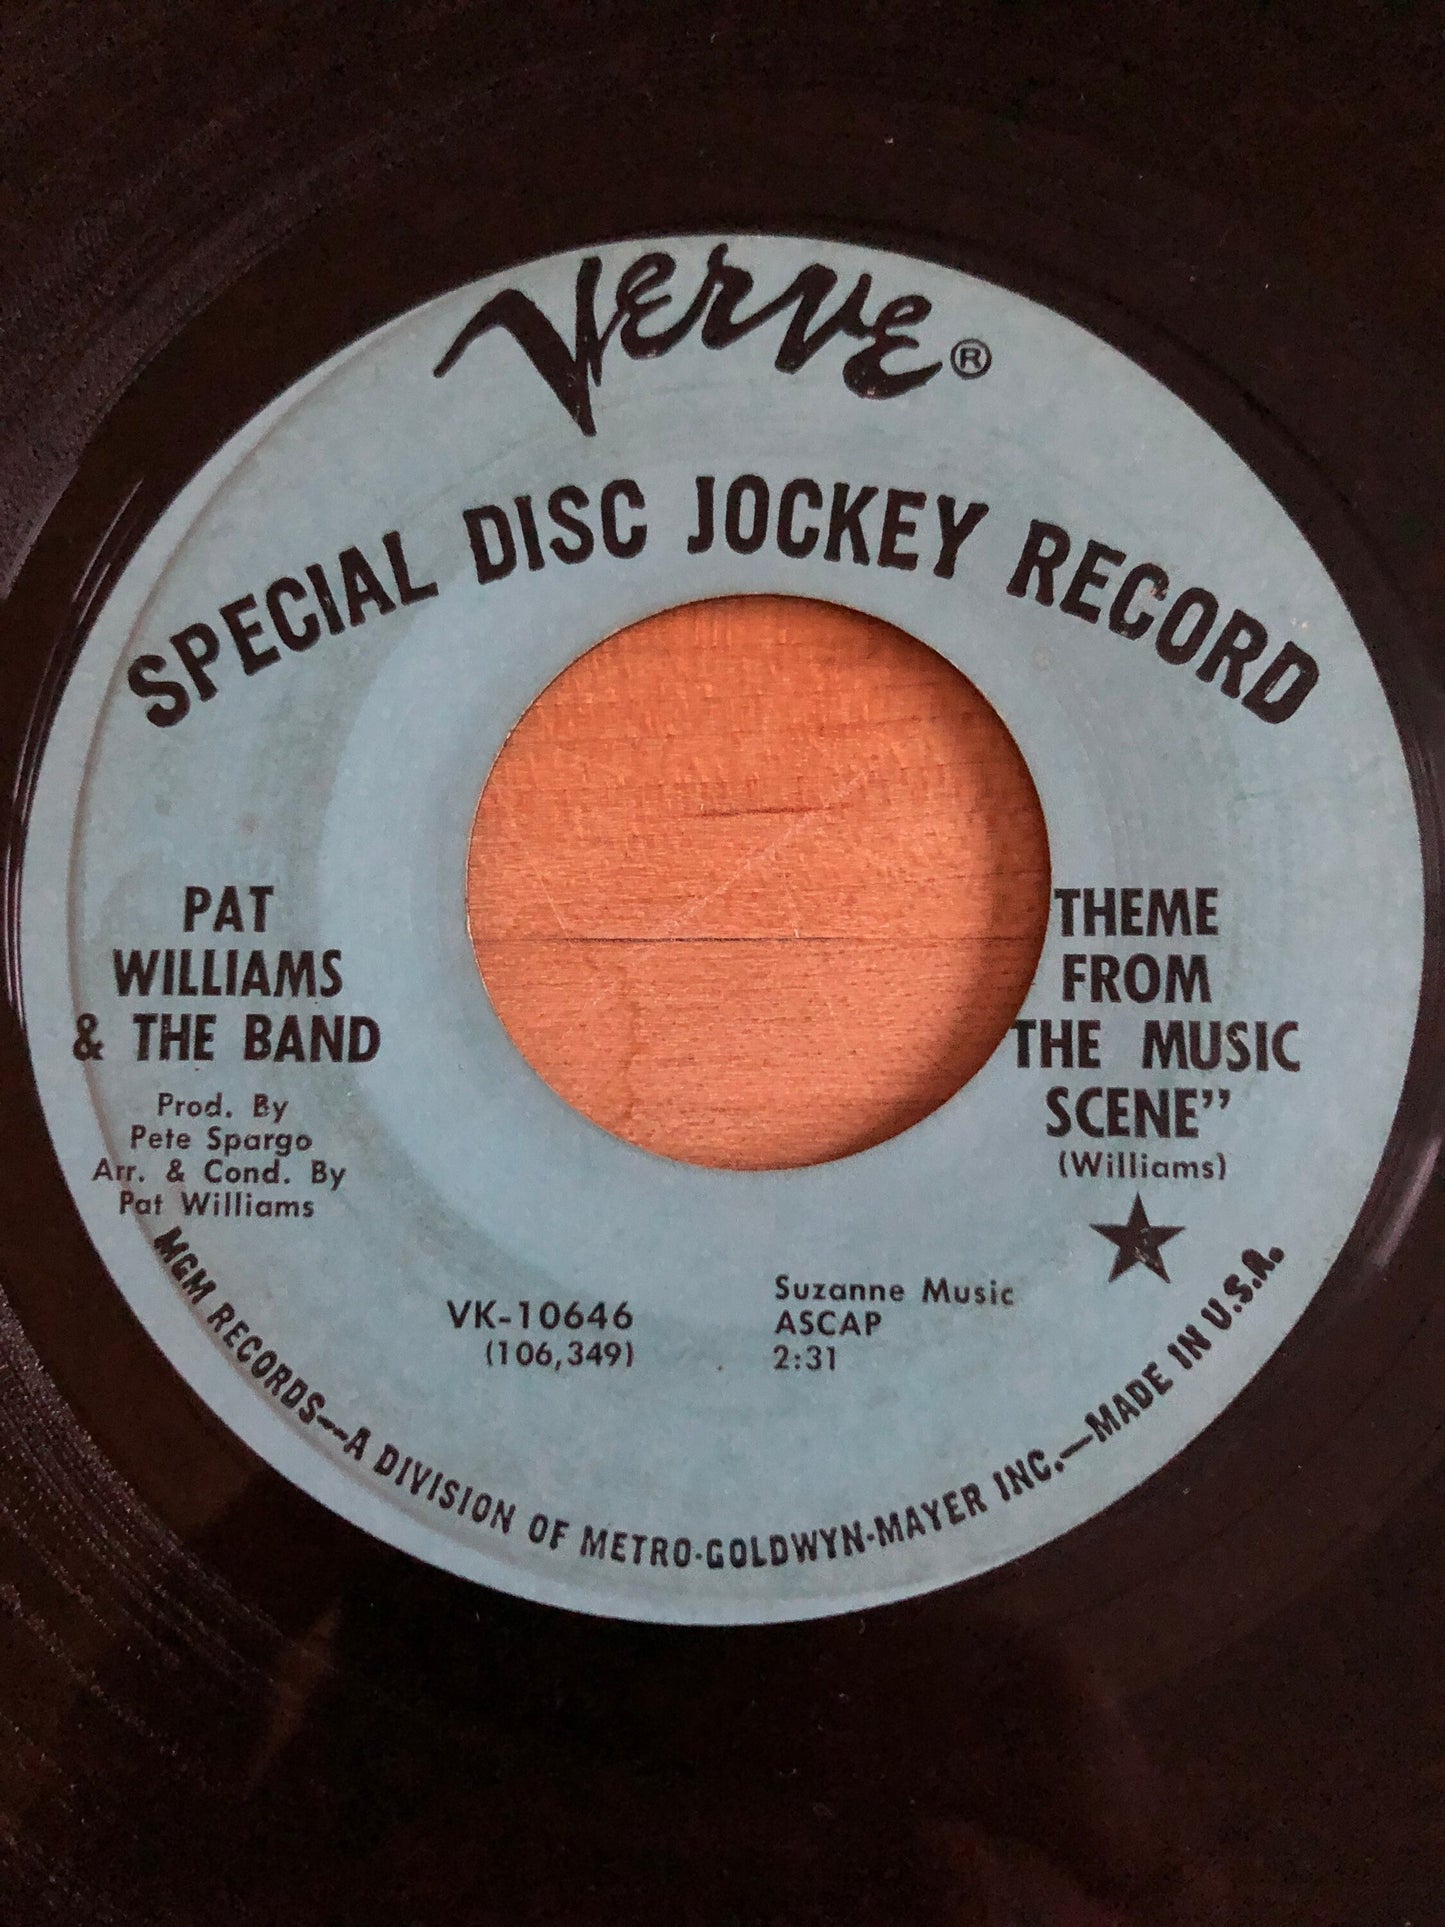 Pat Williams & The Band | Theme From The Music Scene | Don't Leave Me | Vintage 45 rpm | 7" records | VK 10646 PROMO Record | Jazz 45's